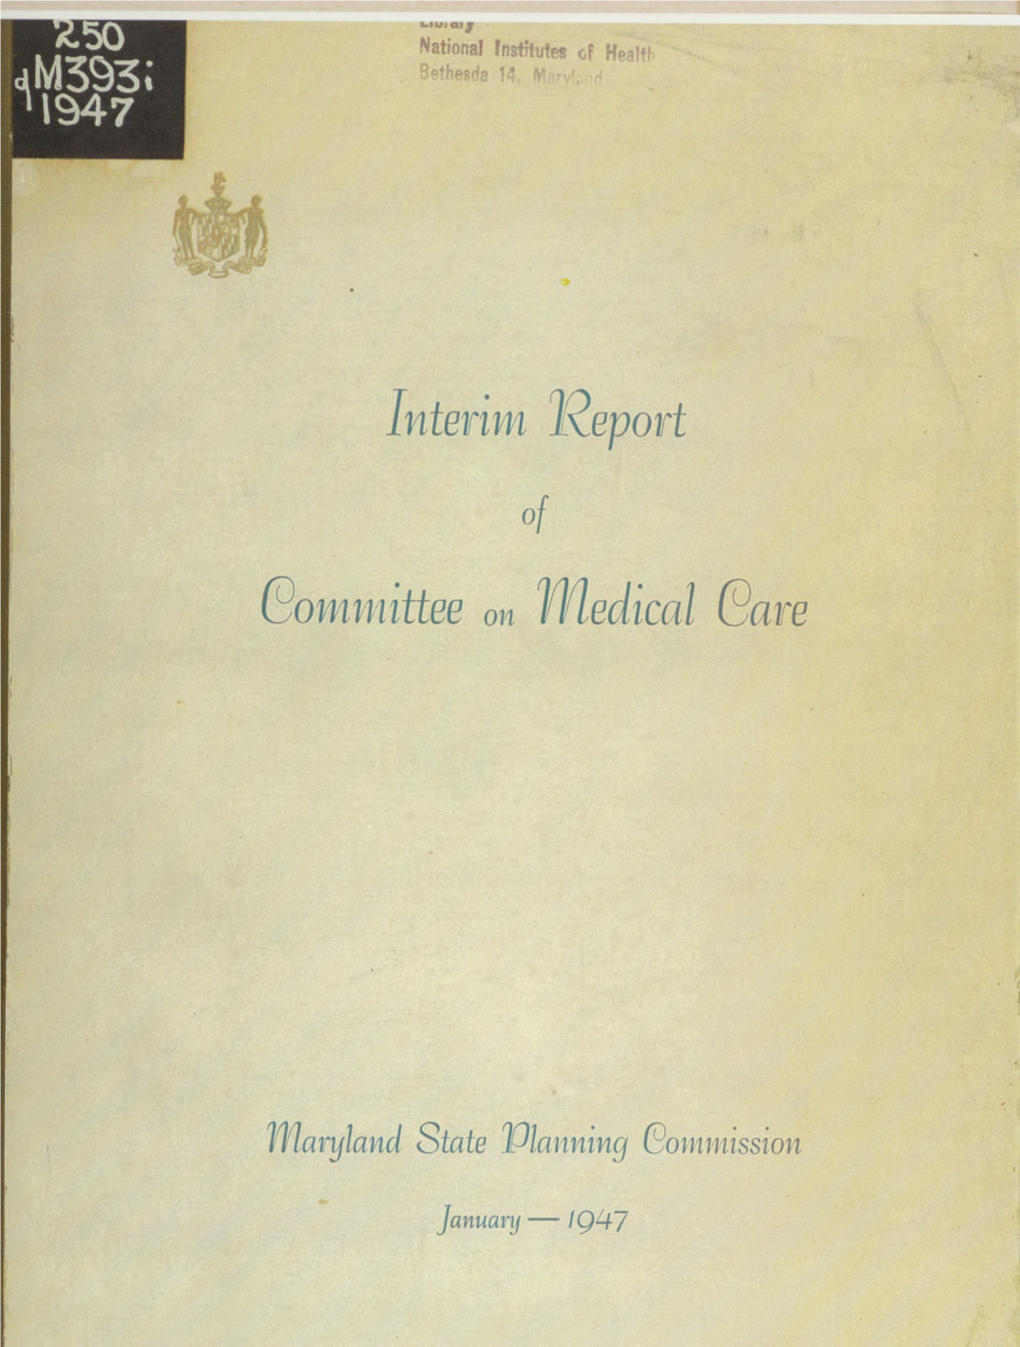 Interim Report of Committee on Medical Care